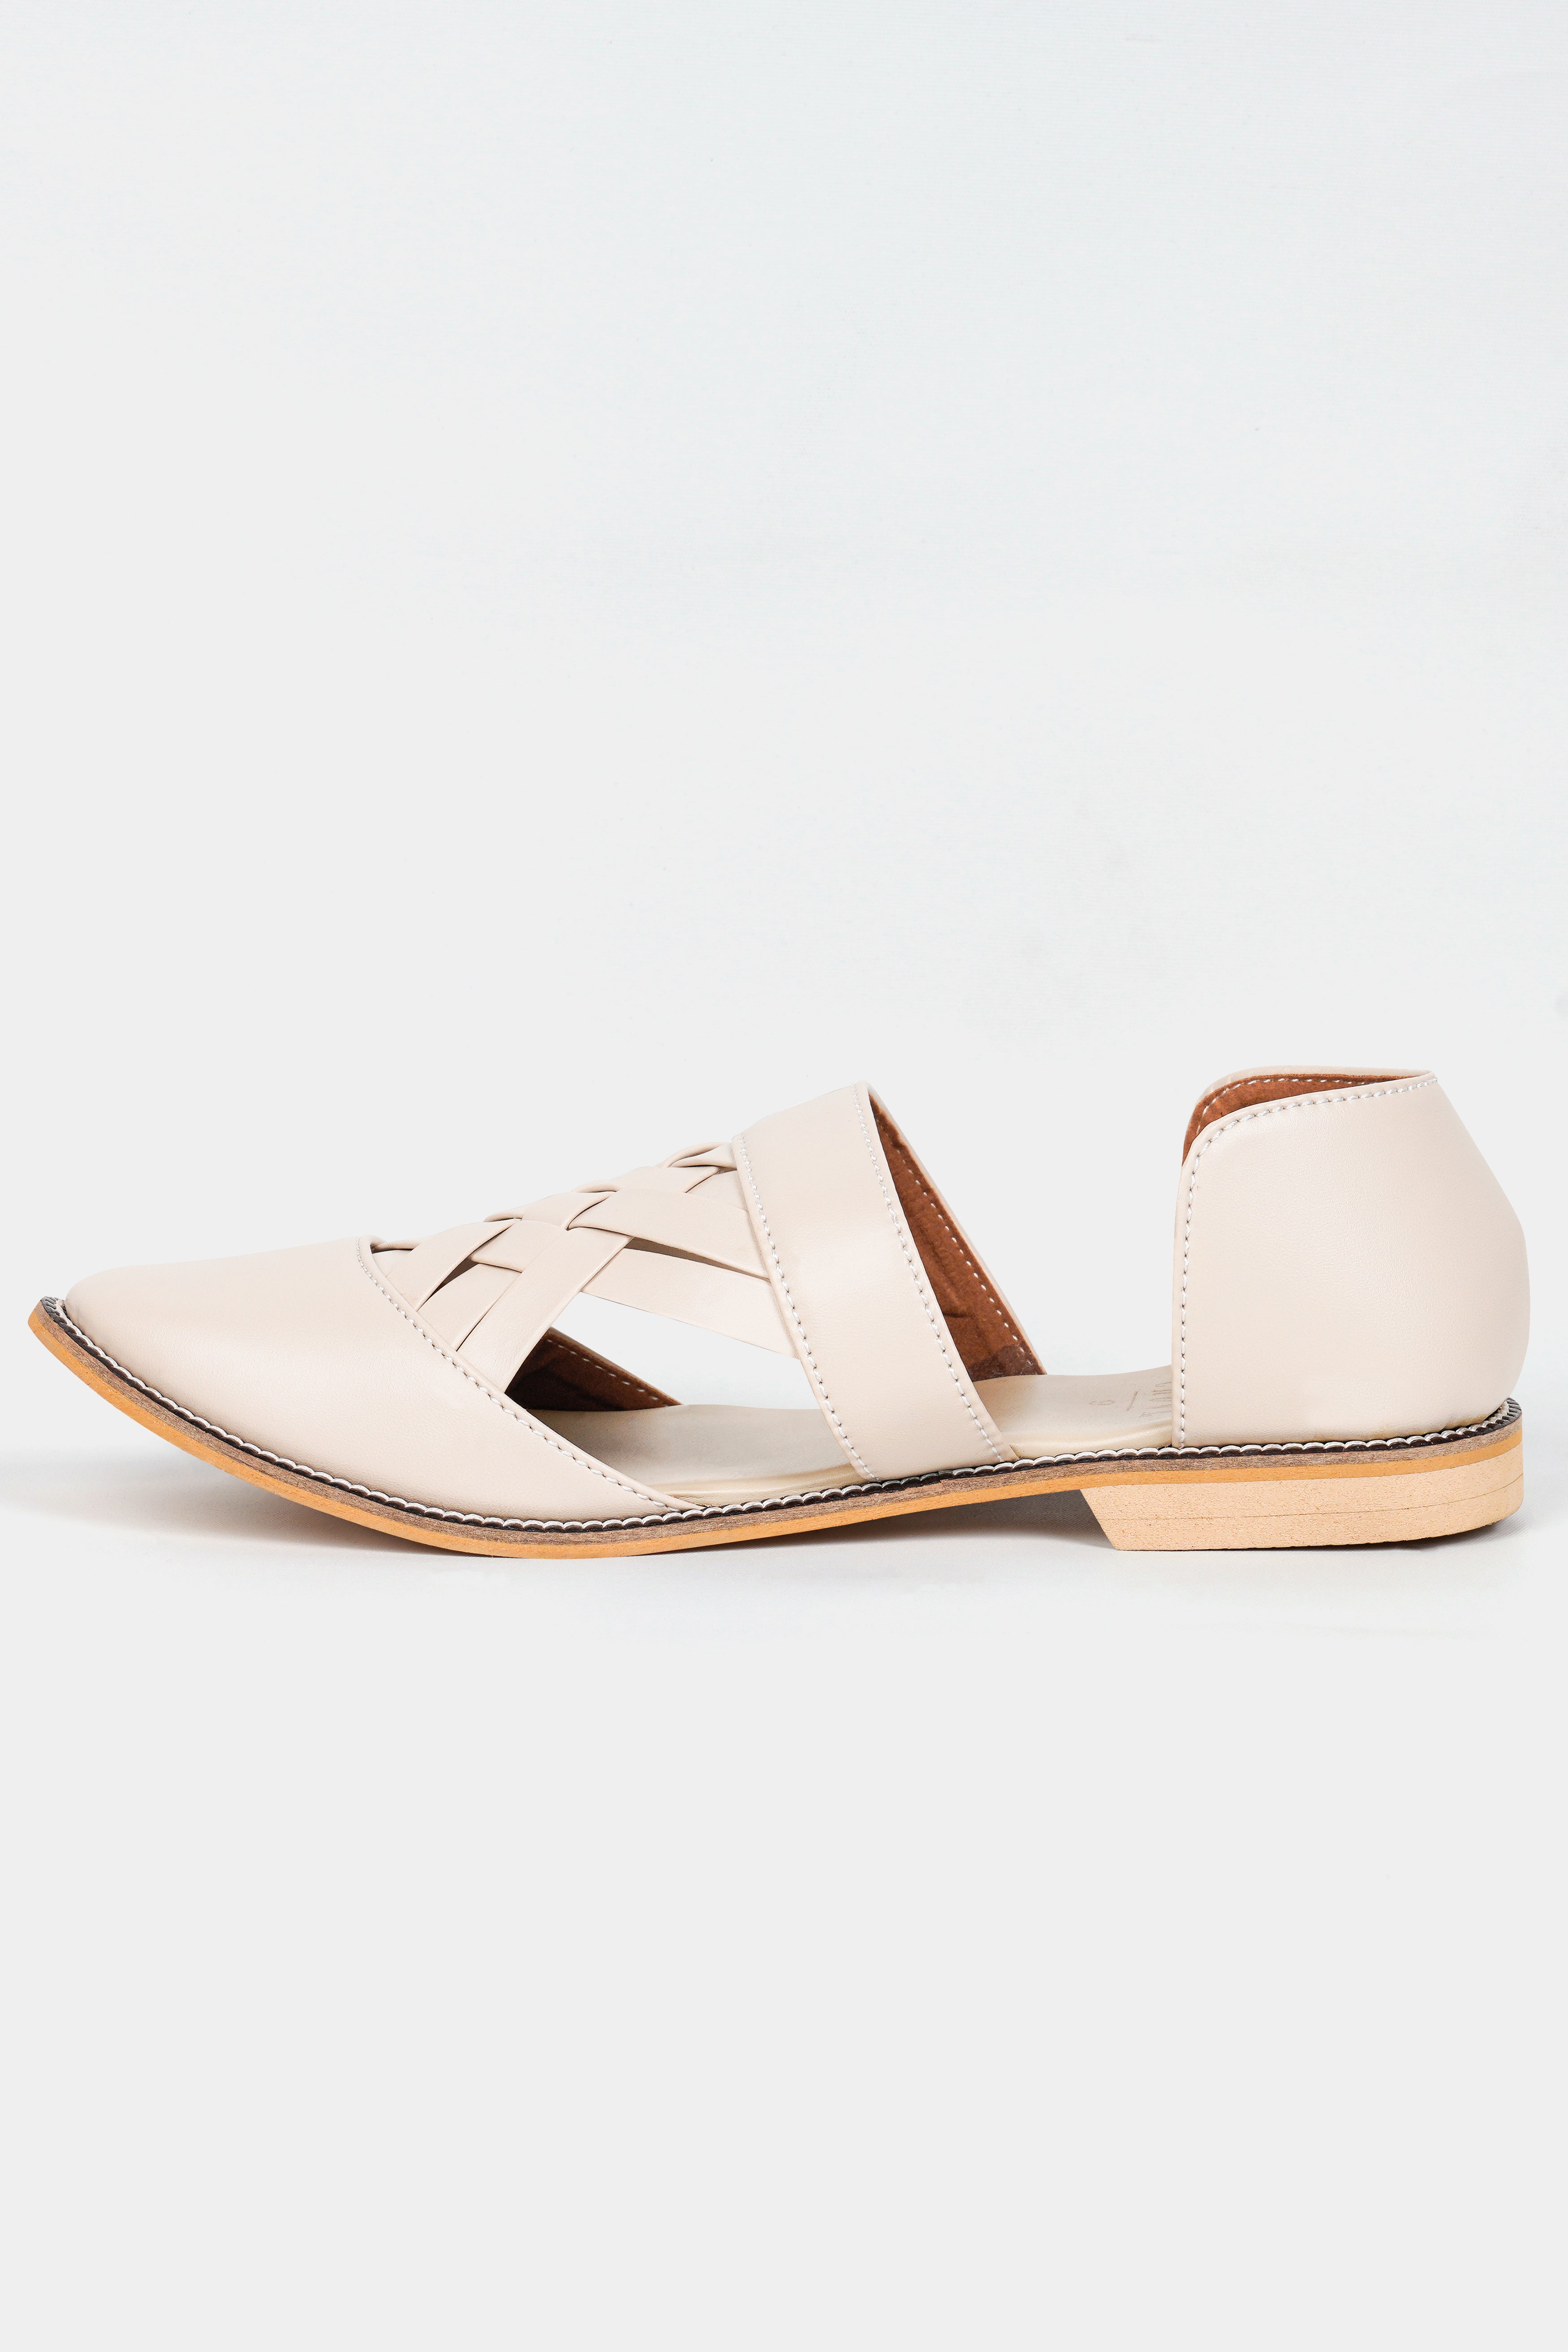 Cream Criss Cross Vegan Leather Hand Stitched Pathanis Sandal FT130-6, FT130-7, FT130-8, FT130-9, FT130-10, FT130-11